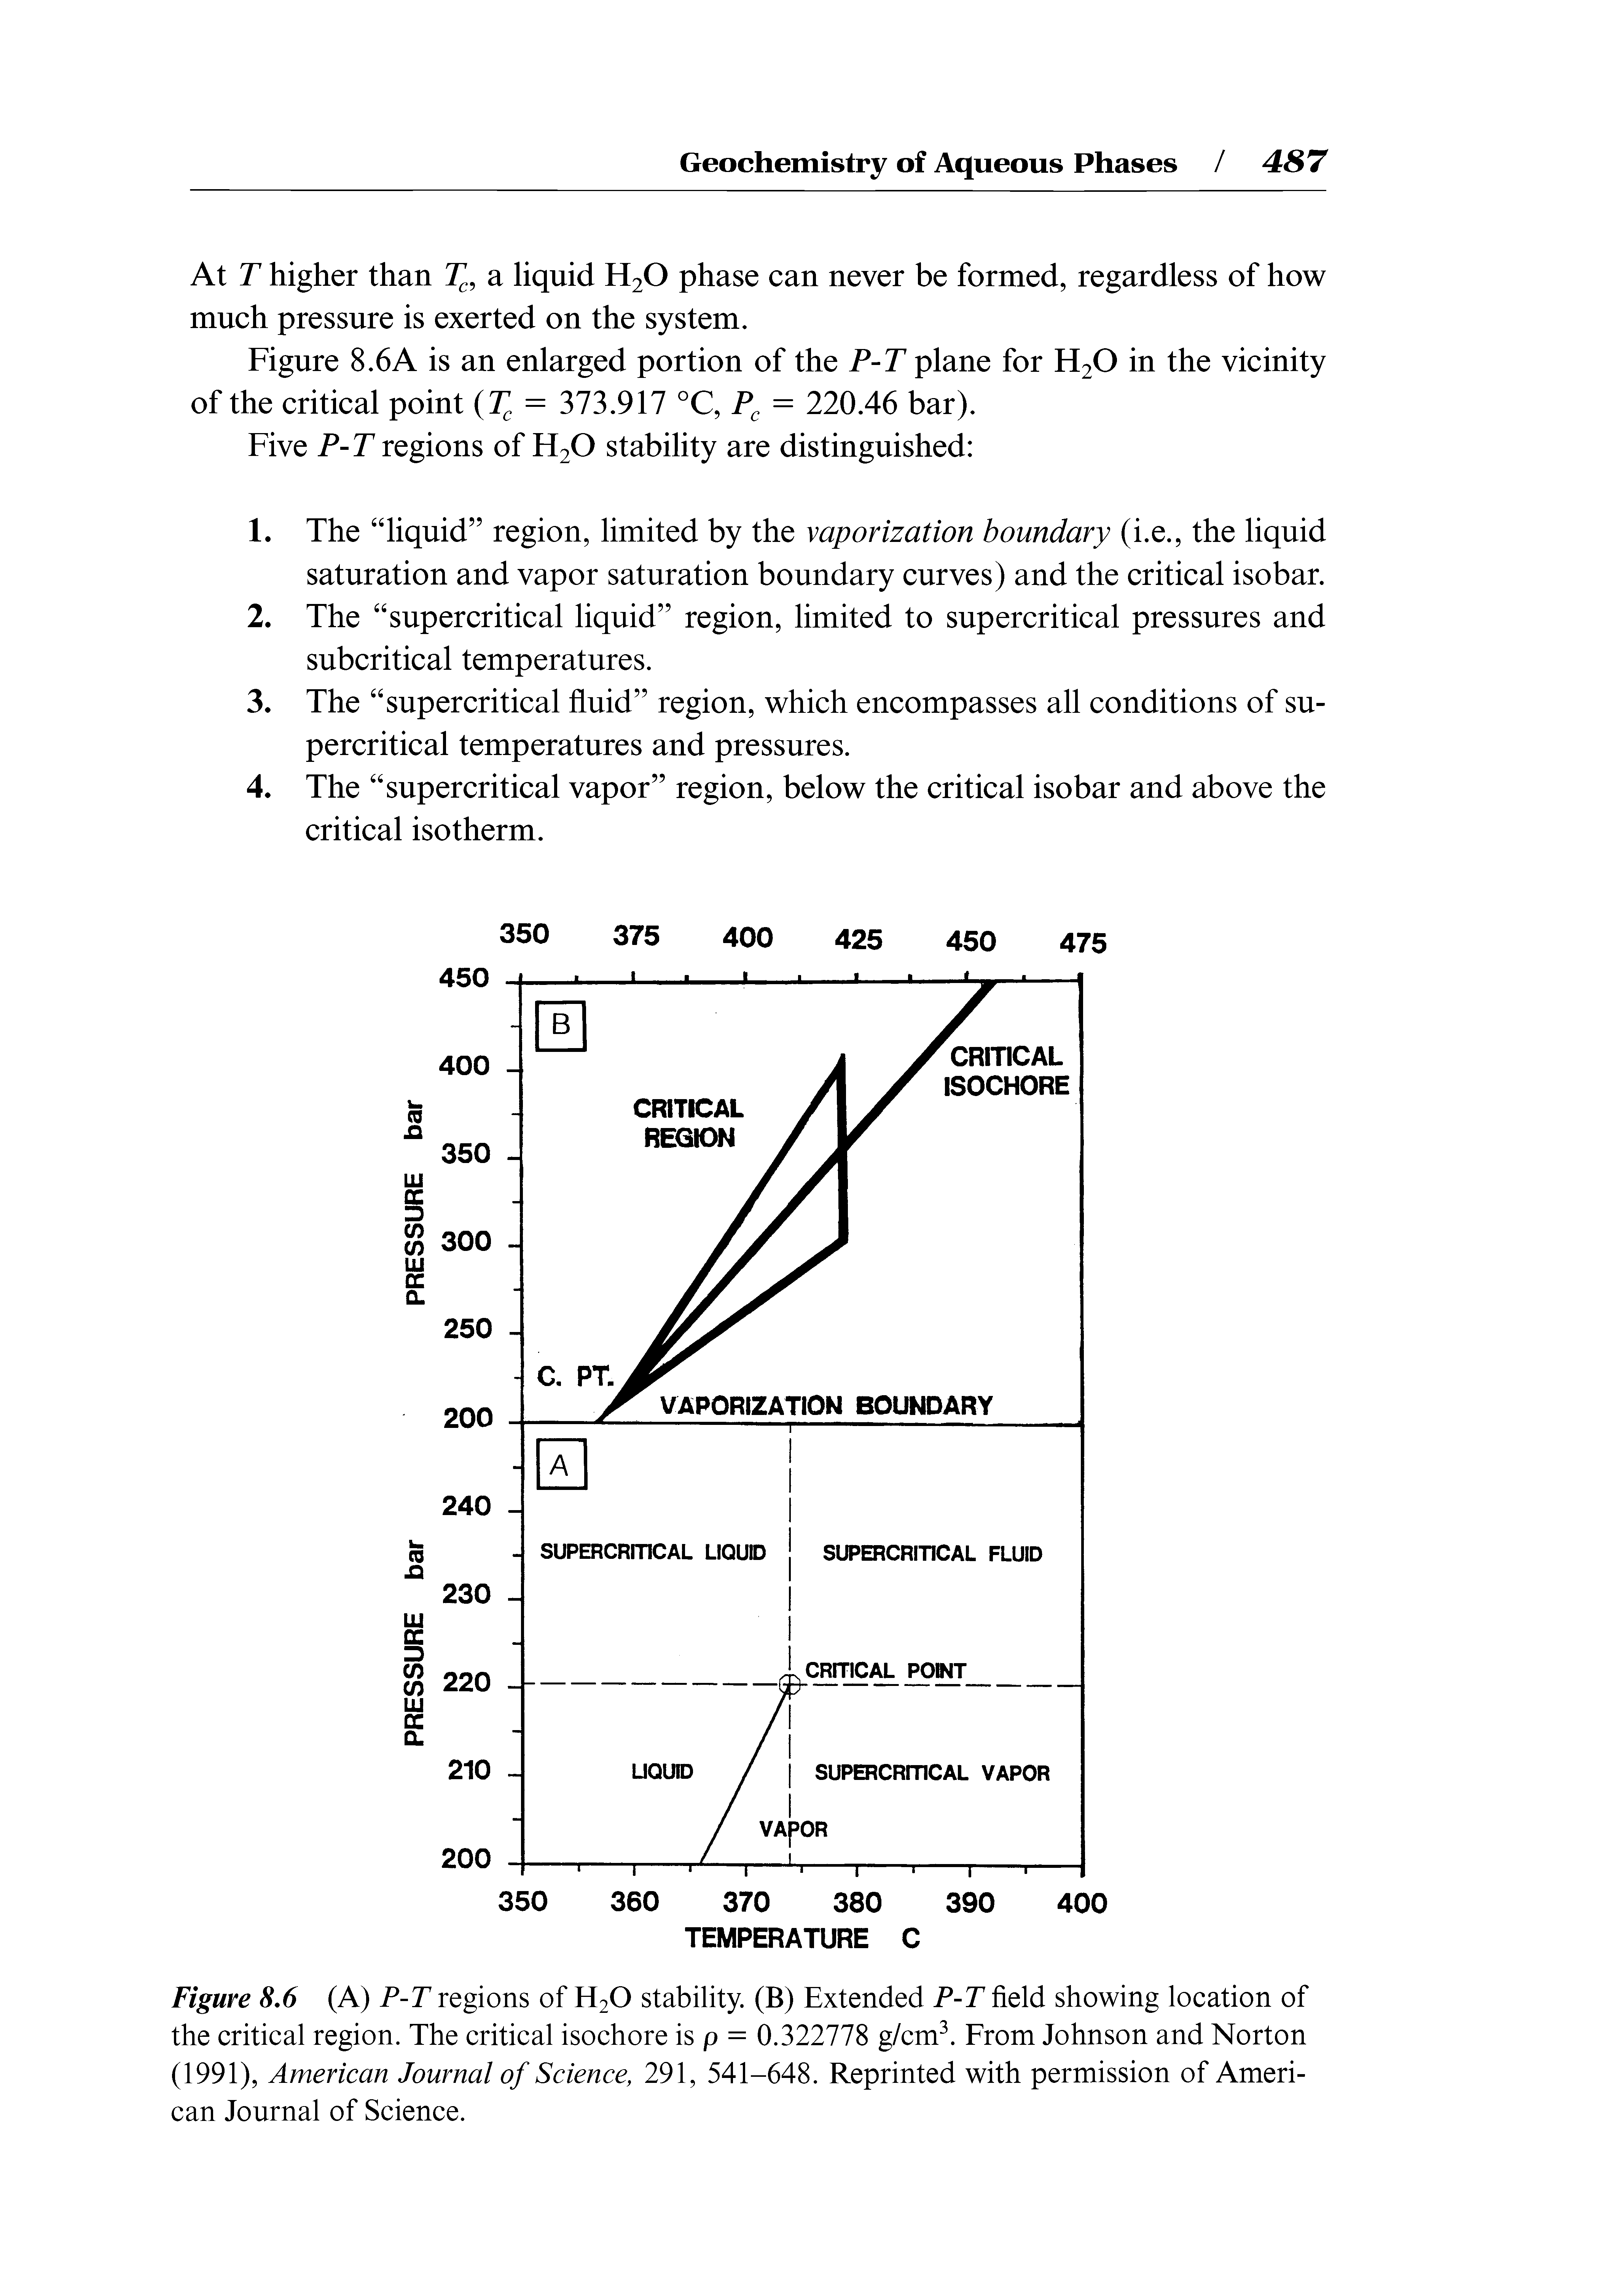 Figure 8,6 (A) P-T regions of H2O stability. (B) Extended P-T field showing location of the critical region. The critical isochore is p = 0.322778 g/cm. From Johnson and Norton (1991), American Journal of Science, 291, 541-648. Reprinted with permission of American Journal of Science.